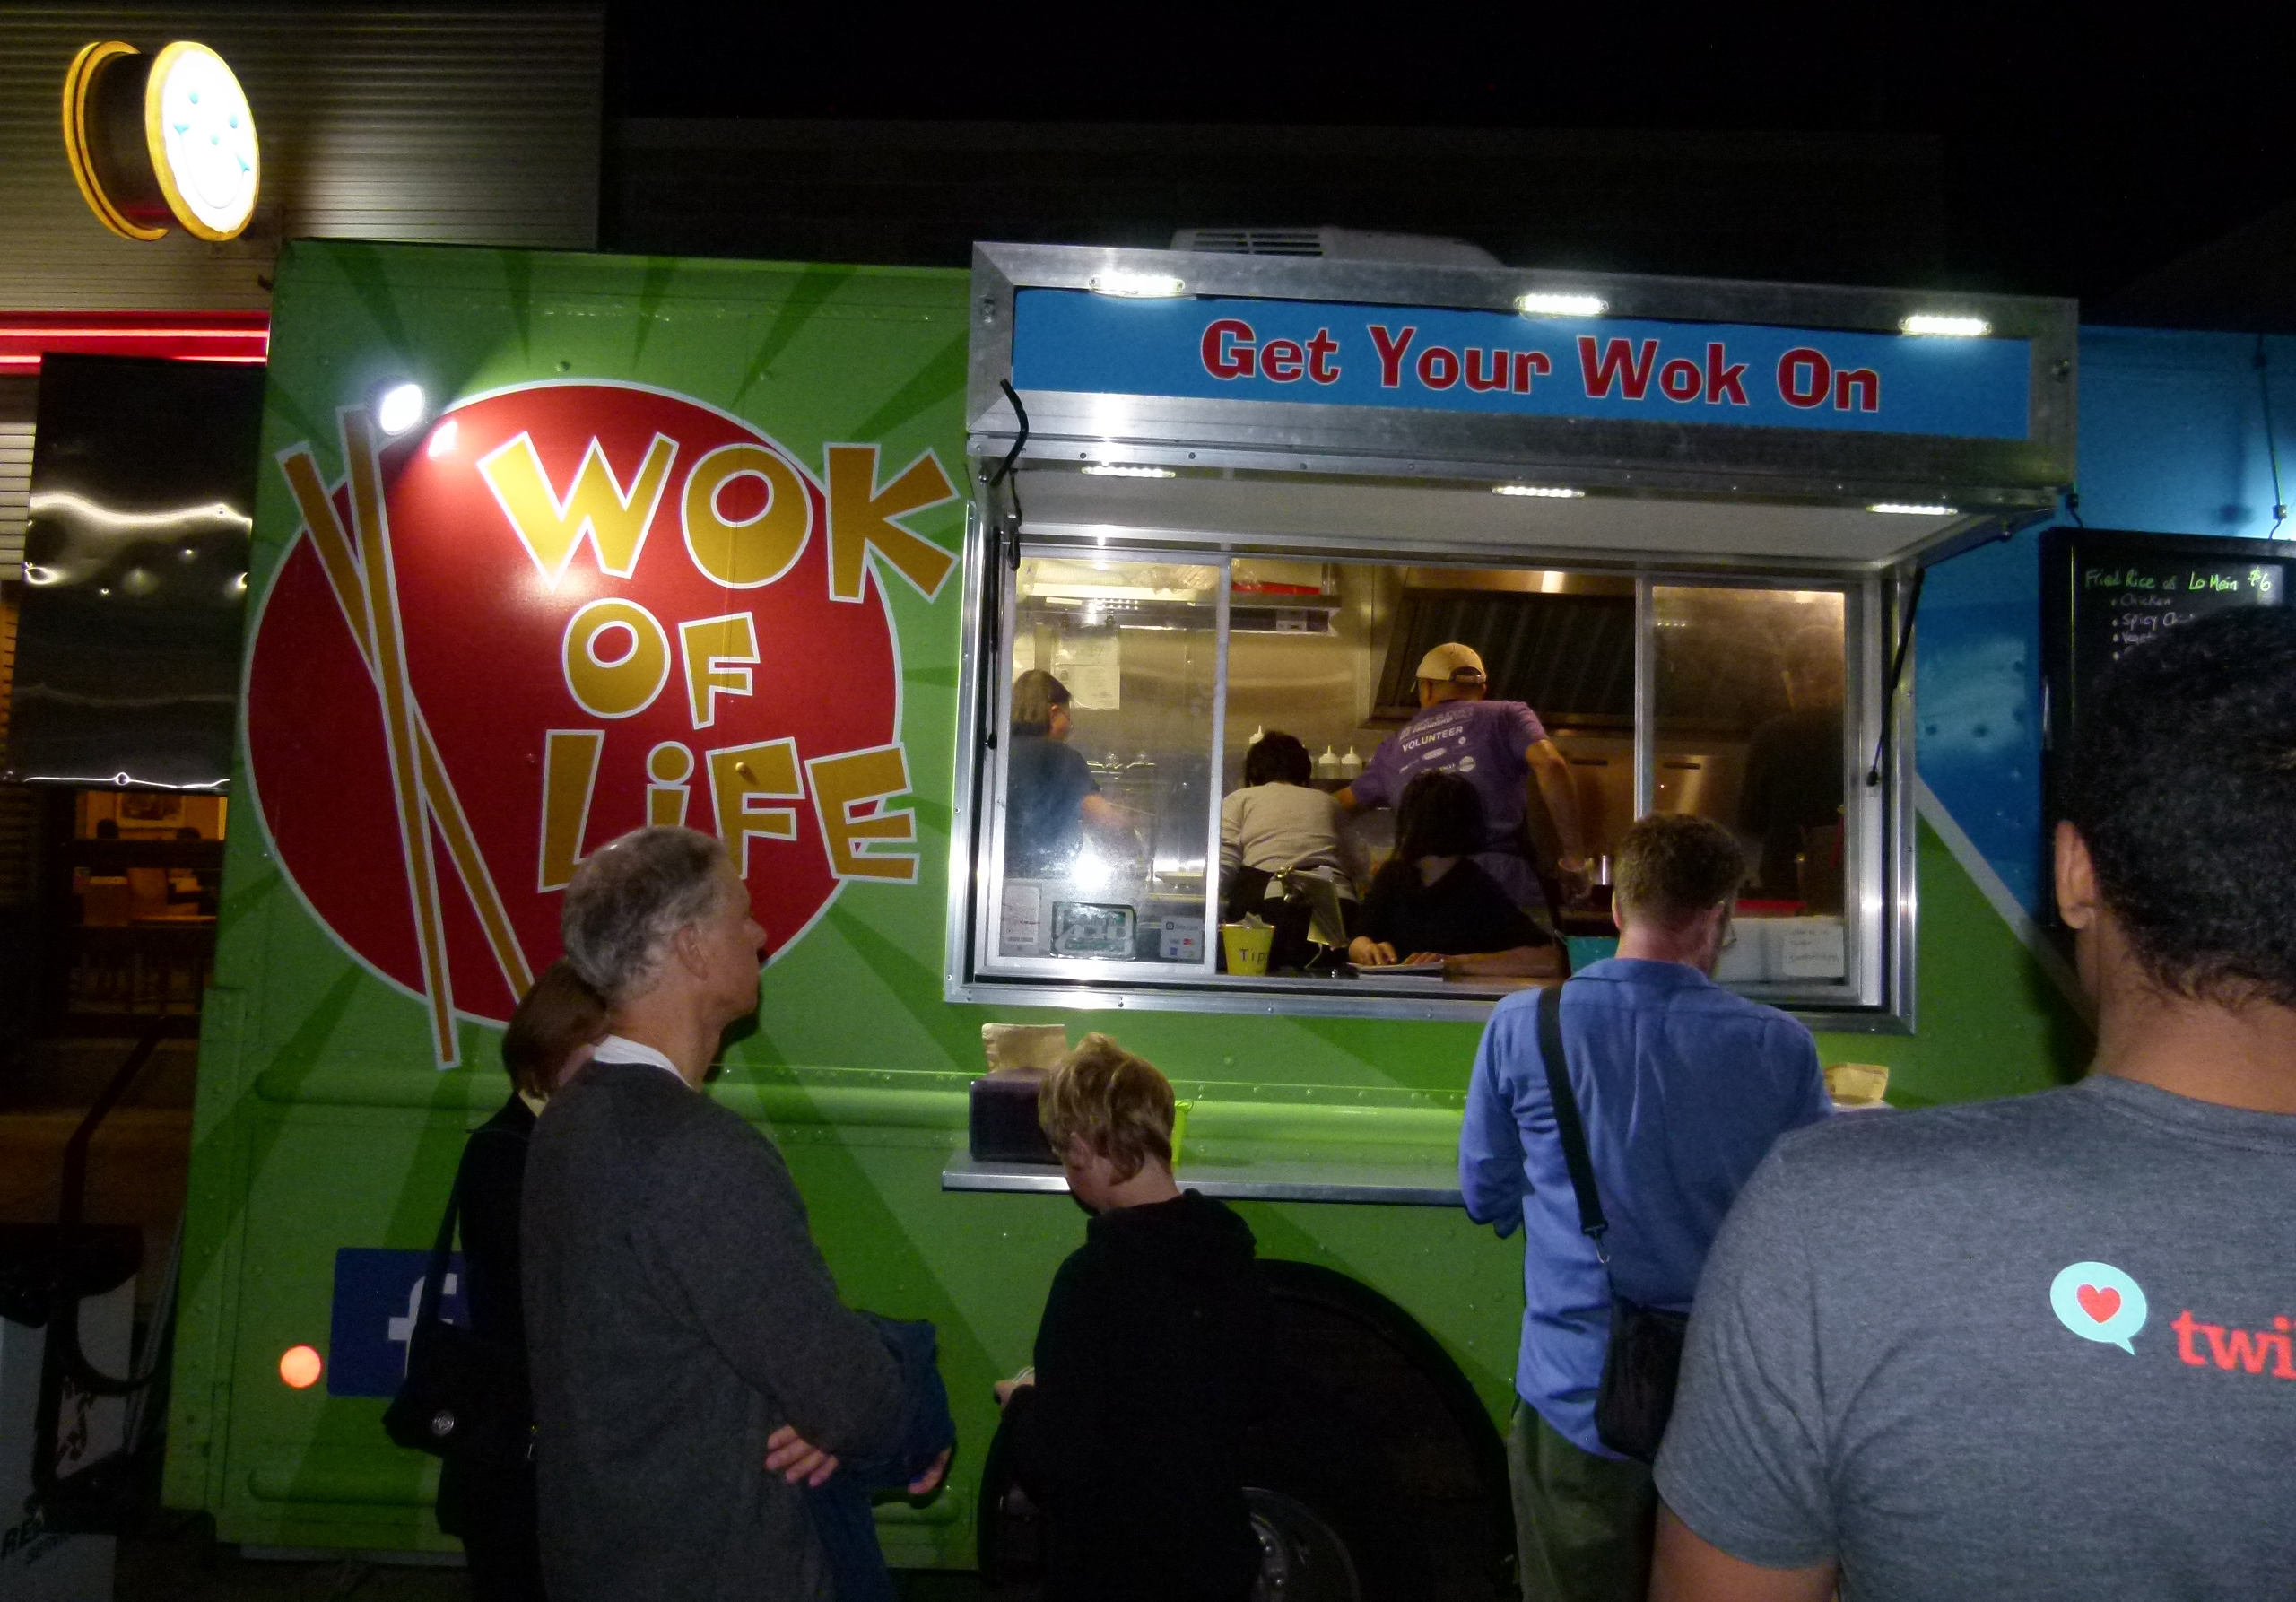 The crew at Wok of Life food truck rapidly preparing hungry patrons' orders as the Eat'n Park lighted Smiley Cookie sign illuminates from above.